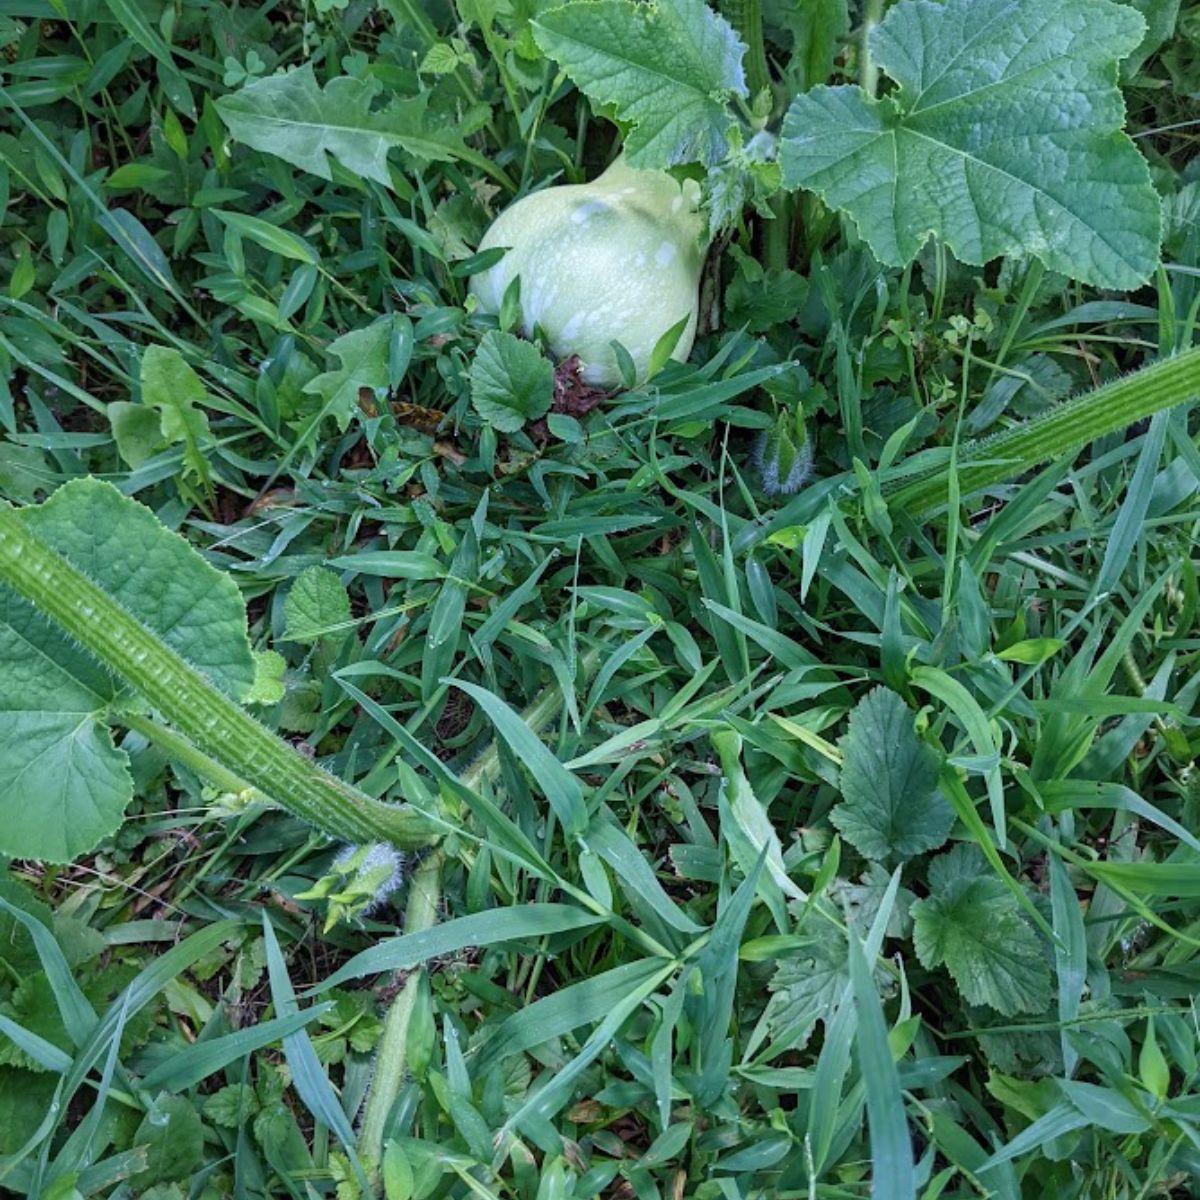 Baby squash surrounded by weeds.